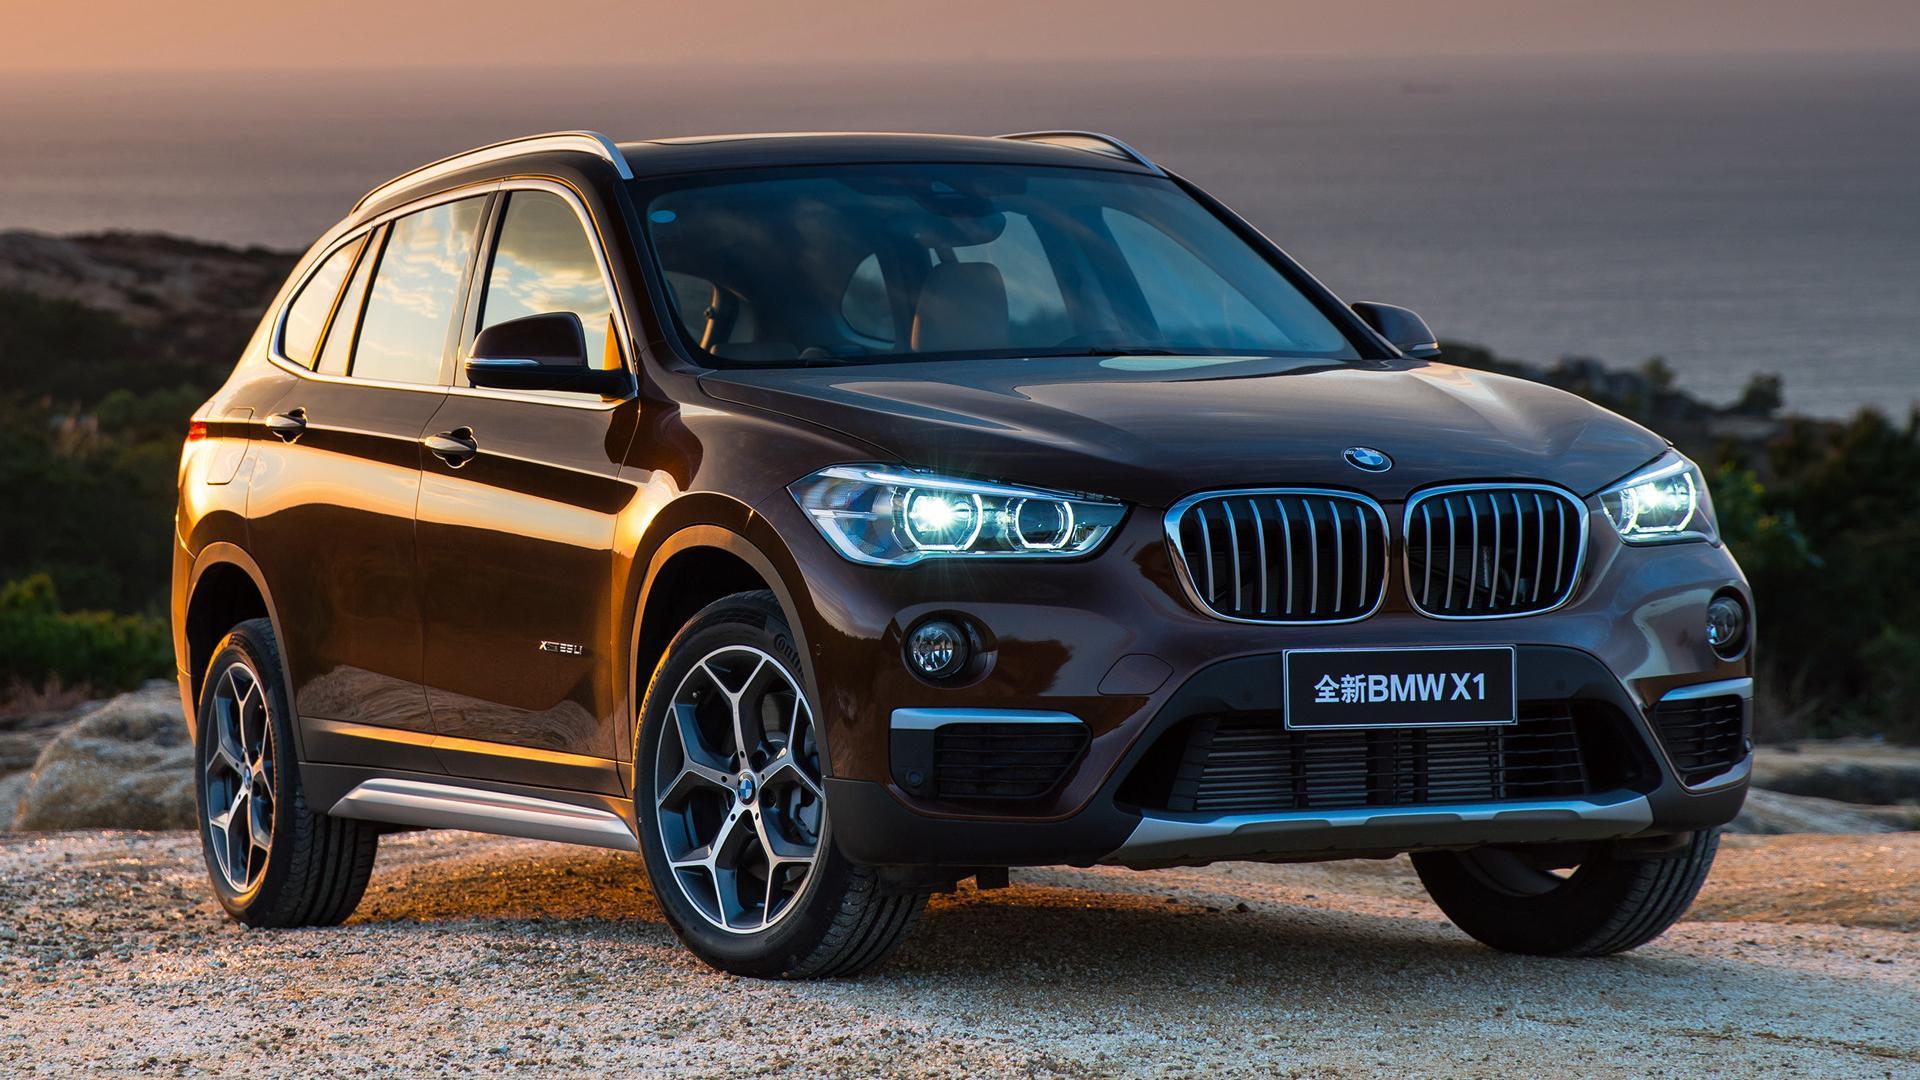 Bmw X1 Wallpaper Android